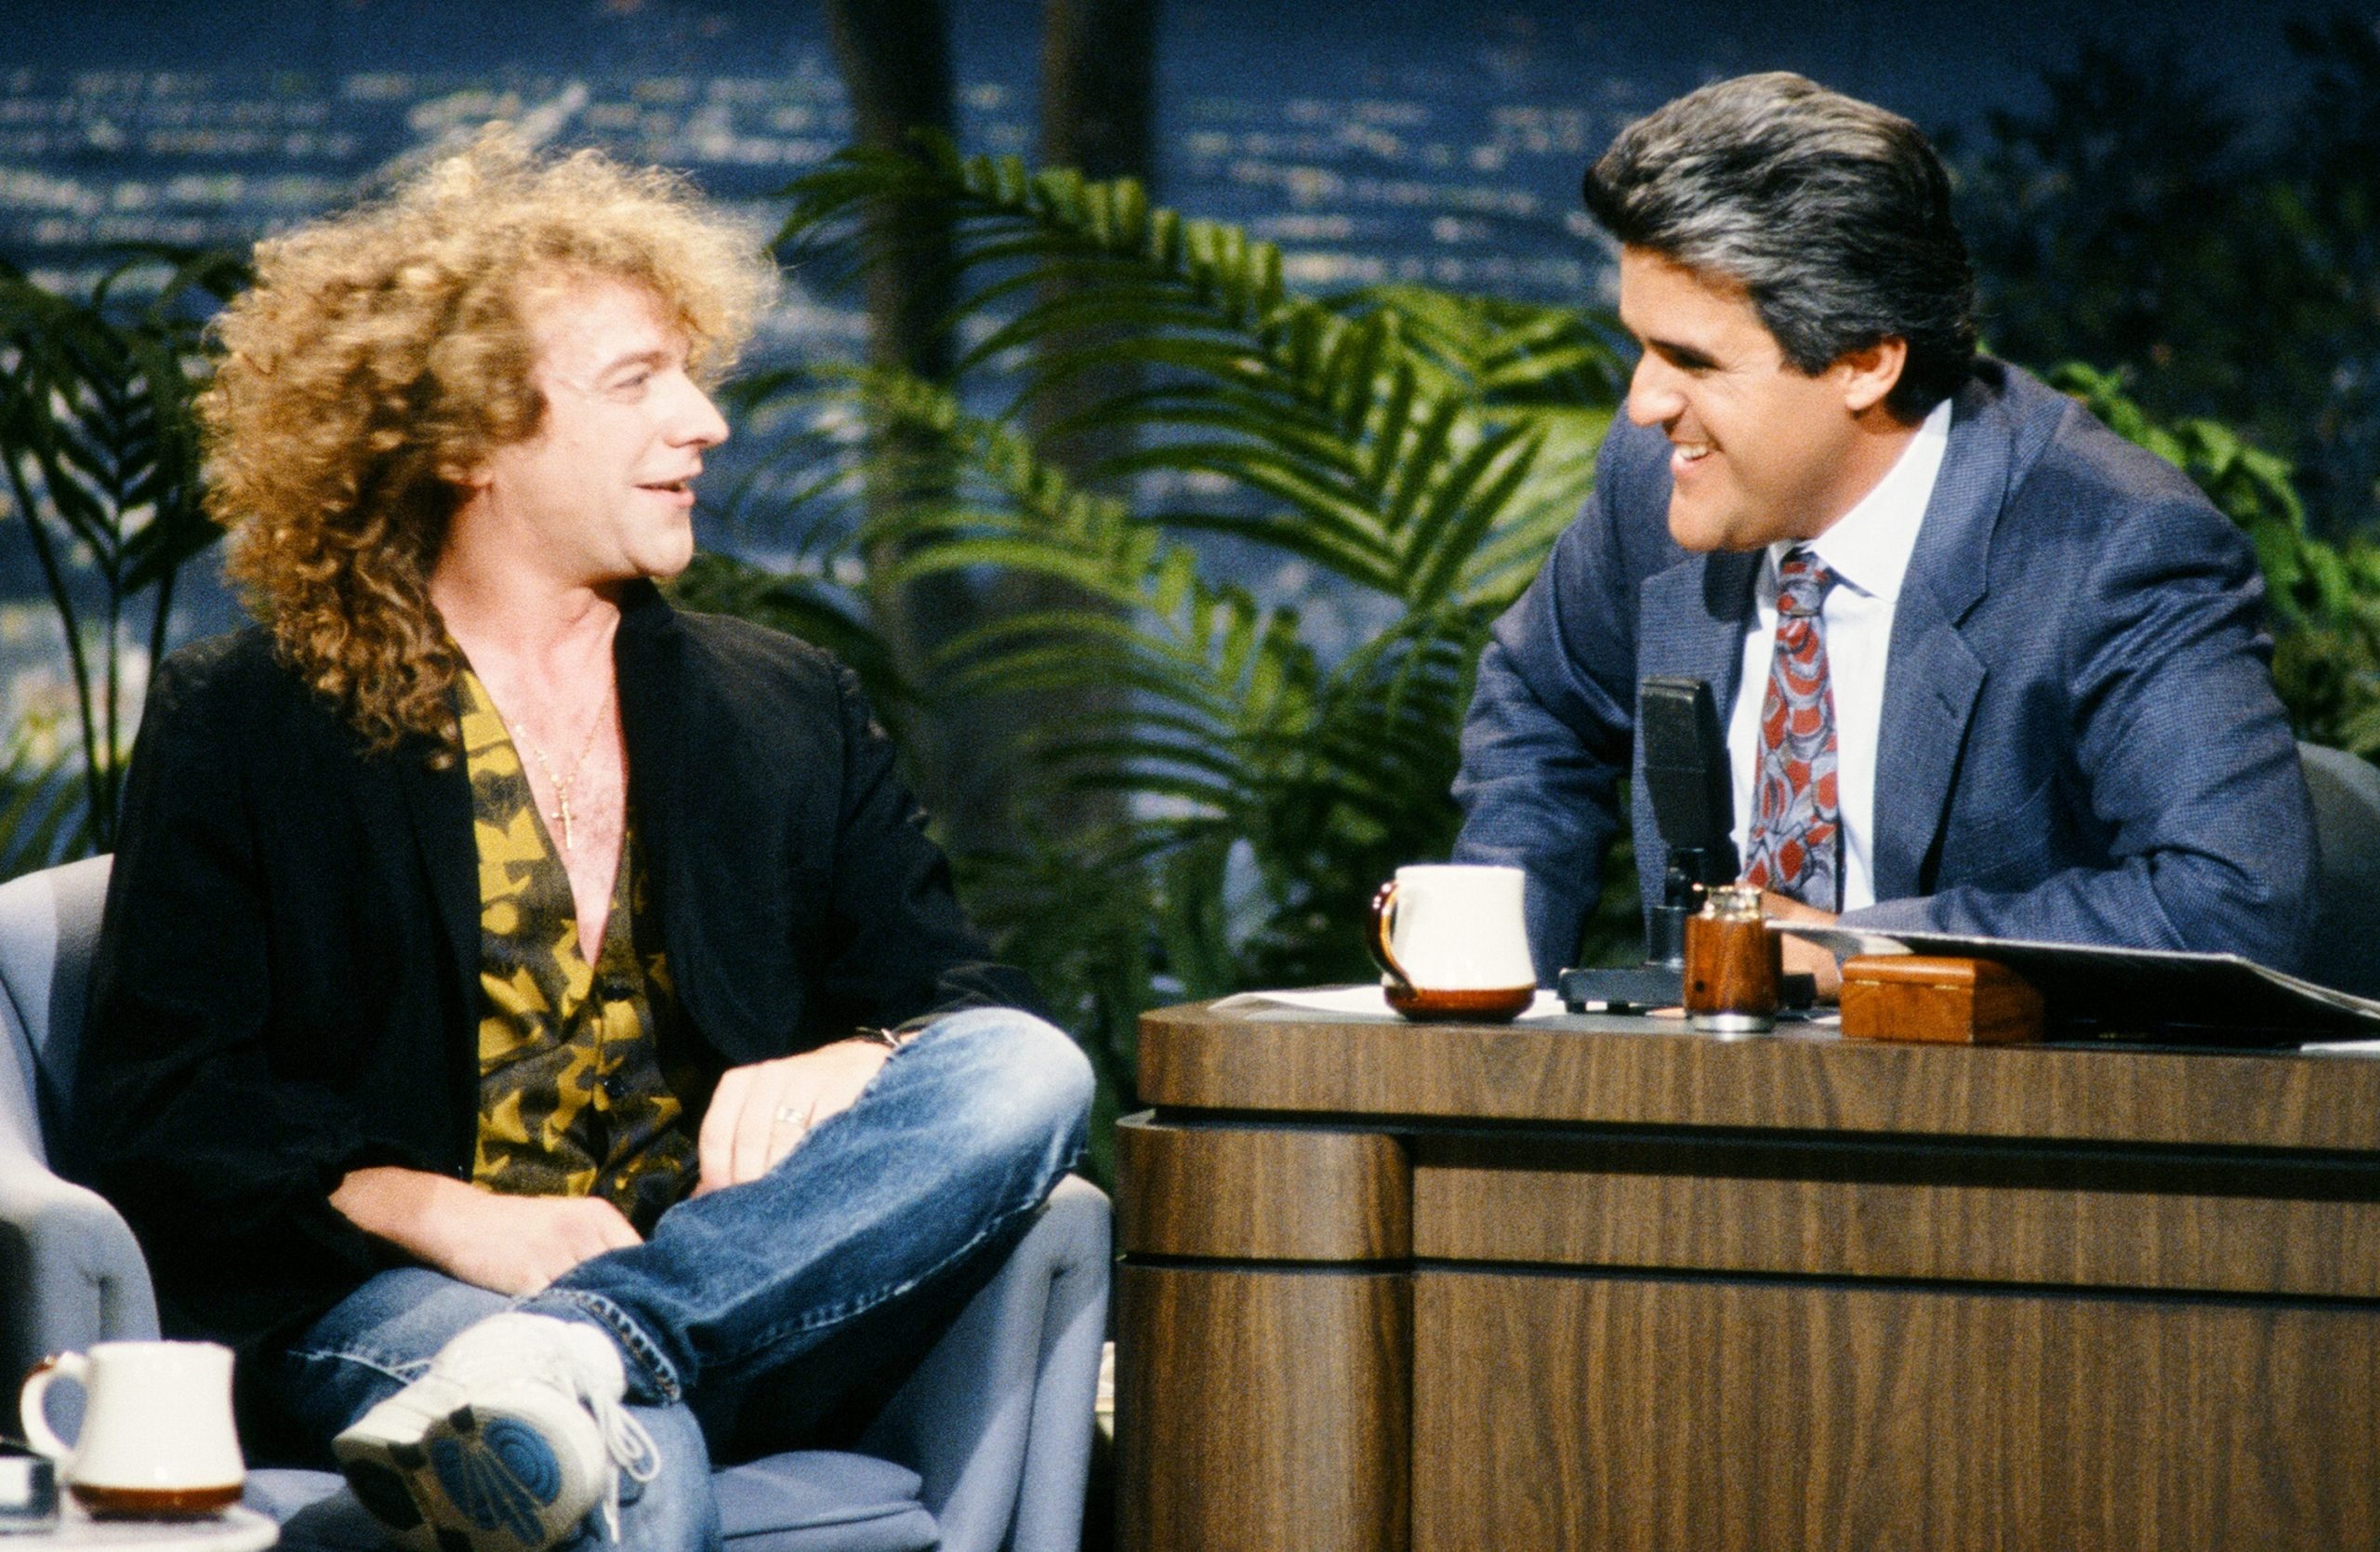 (left to right): Former Foreigner lead singer Lou Gramm, who gave 'Waiting For a Girl Like You' its soul, sat down with late-night show host Jay Leno in 1990